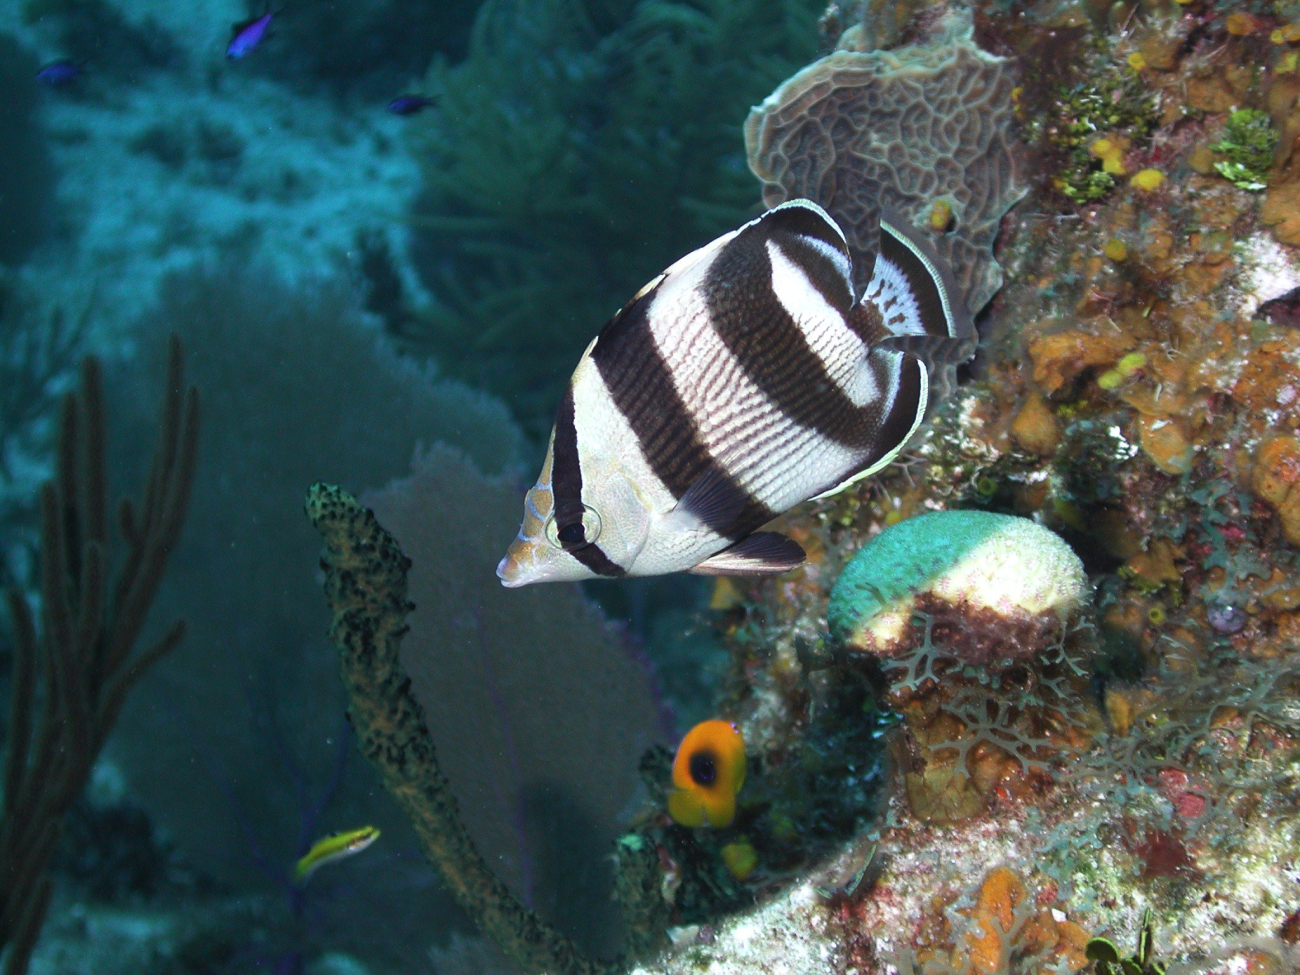 This banded butterflyfish is one of the more important predators on shallowcoral reefs